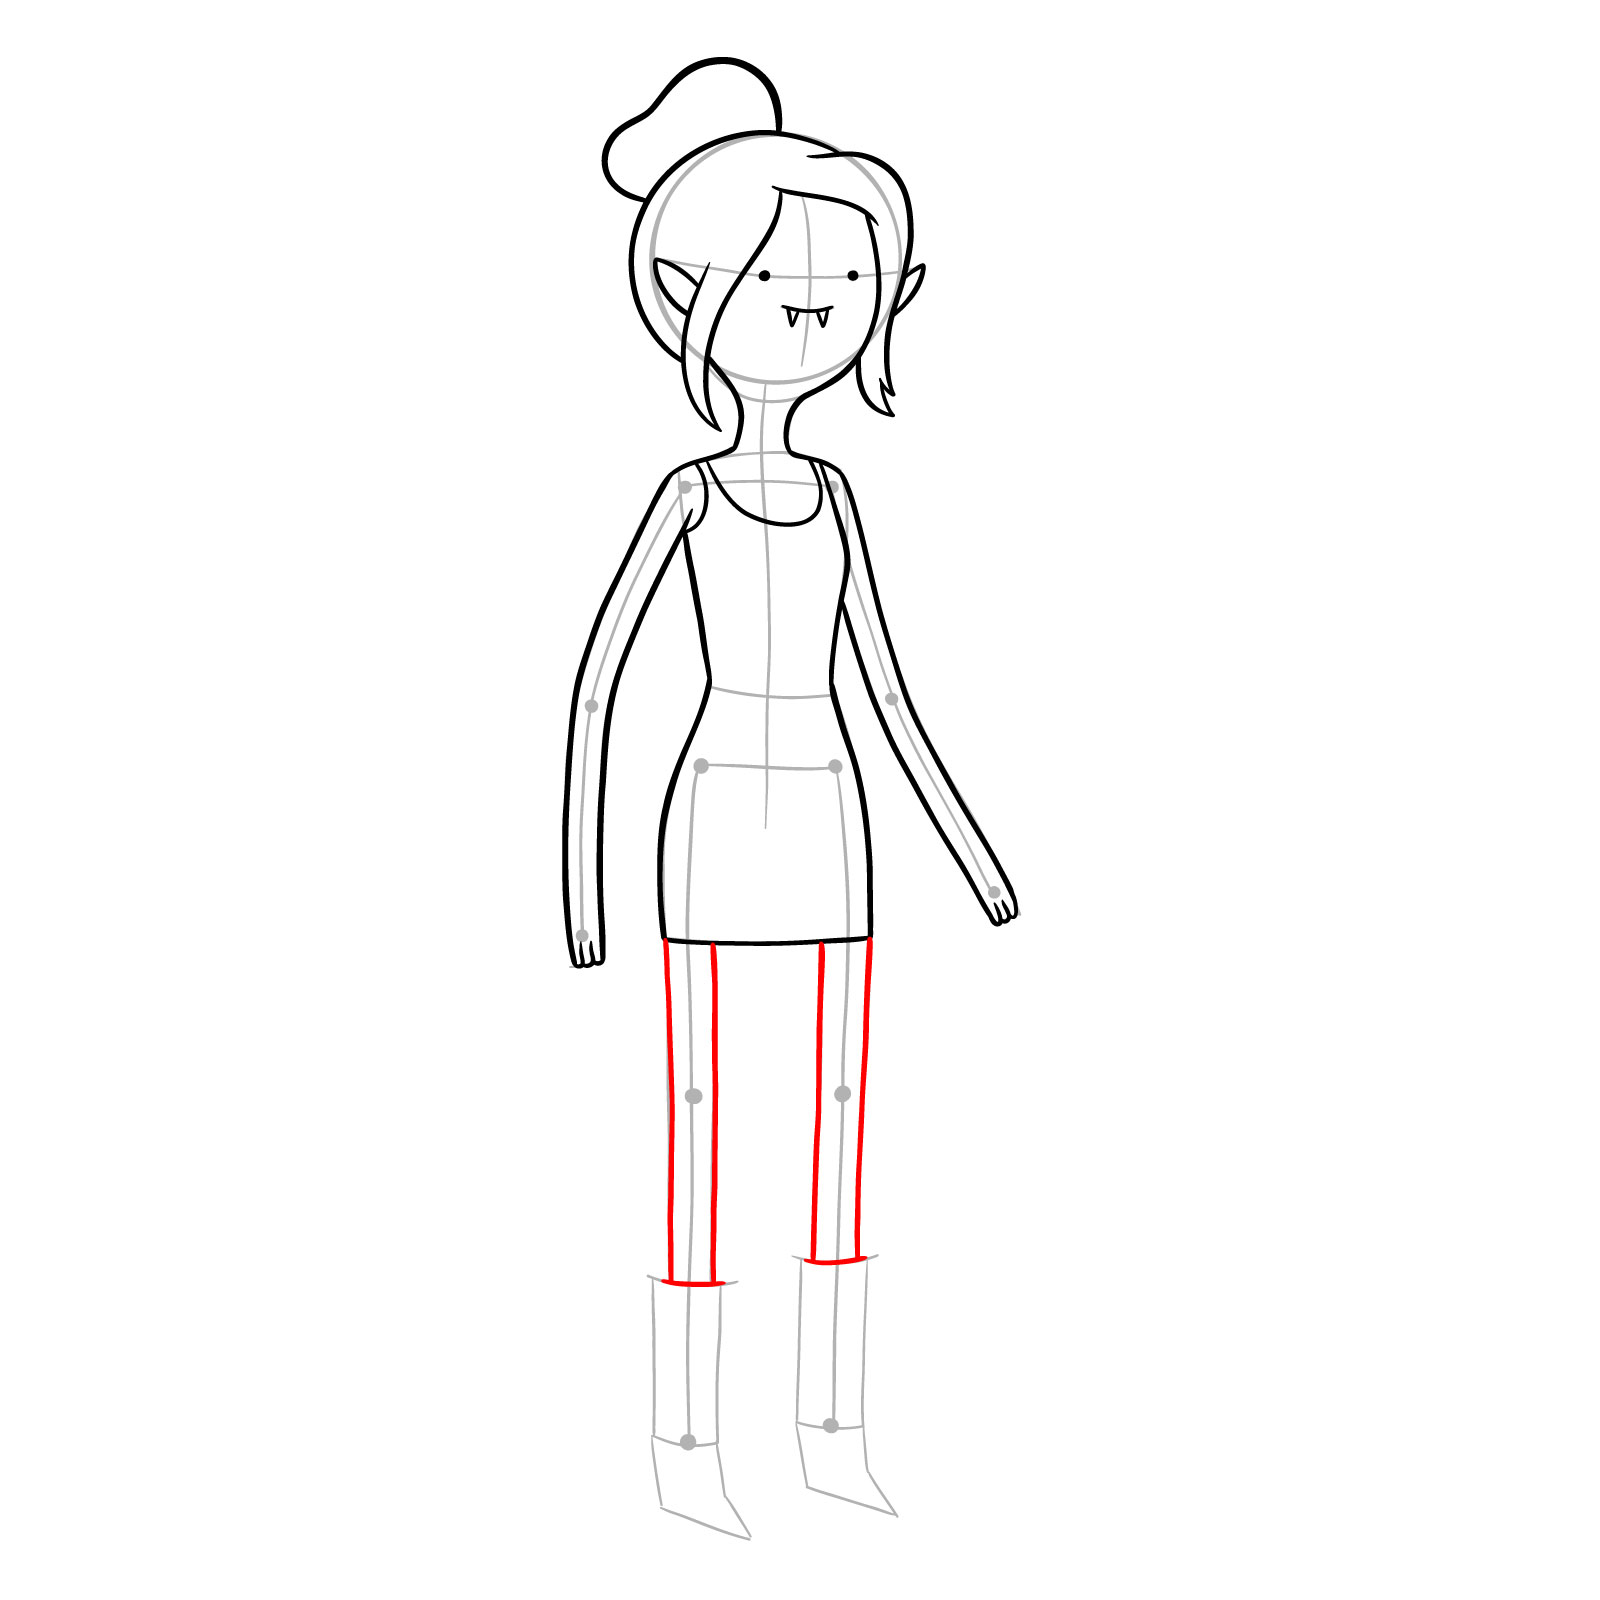 How to draw Marceline from Broke His Crown episode - step 18